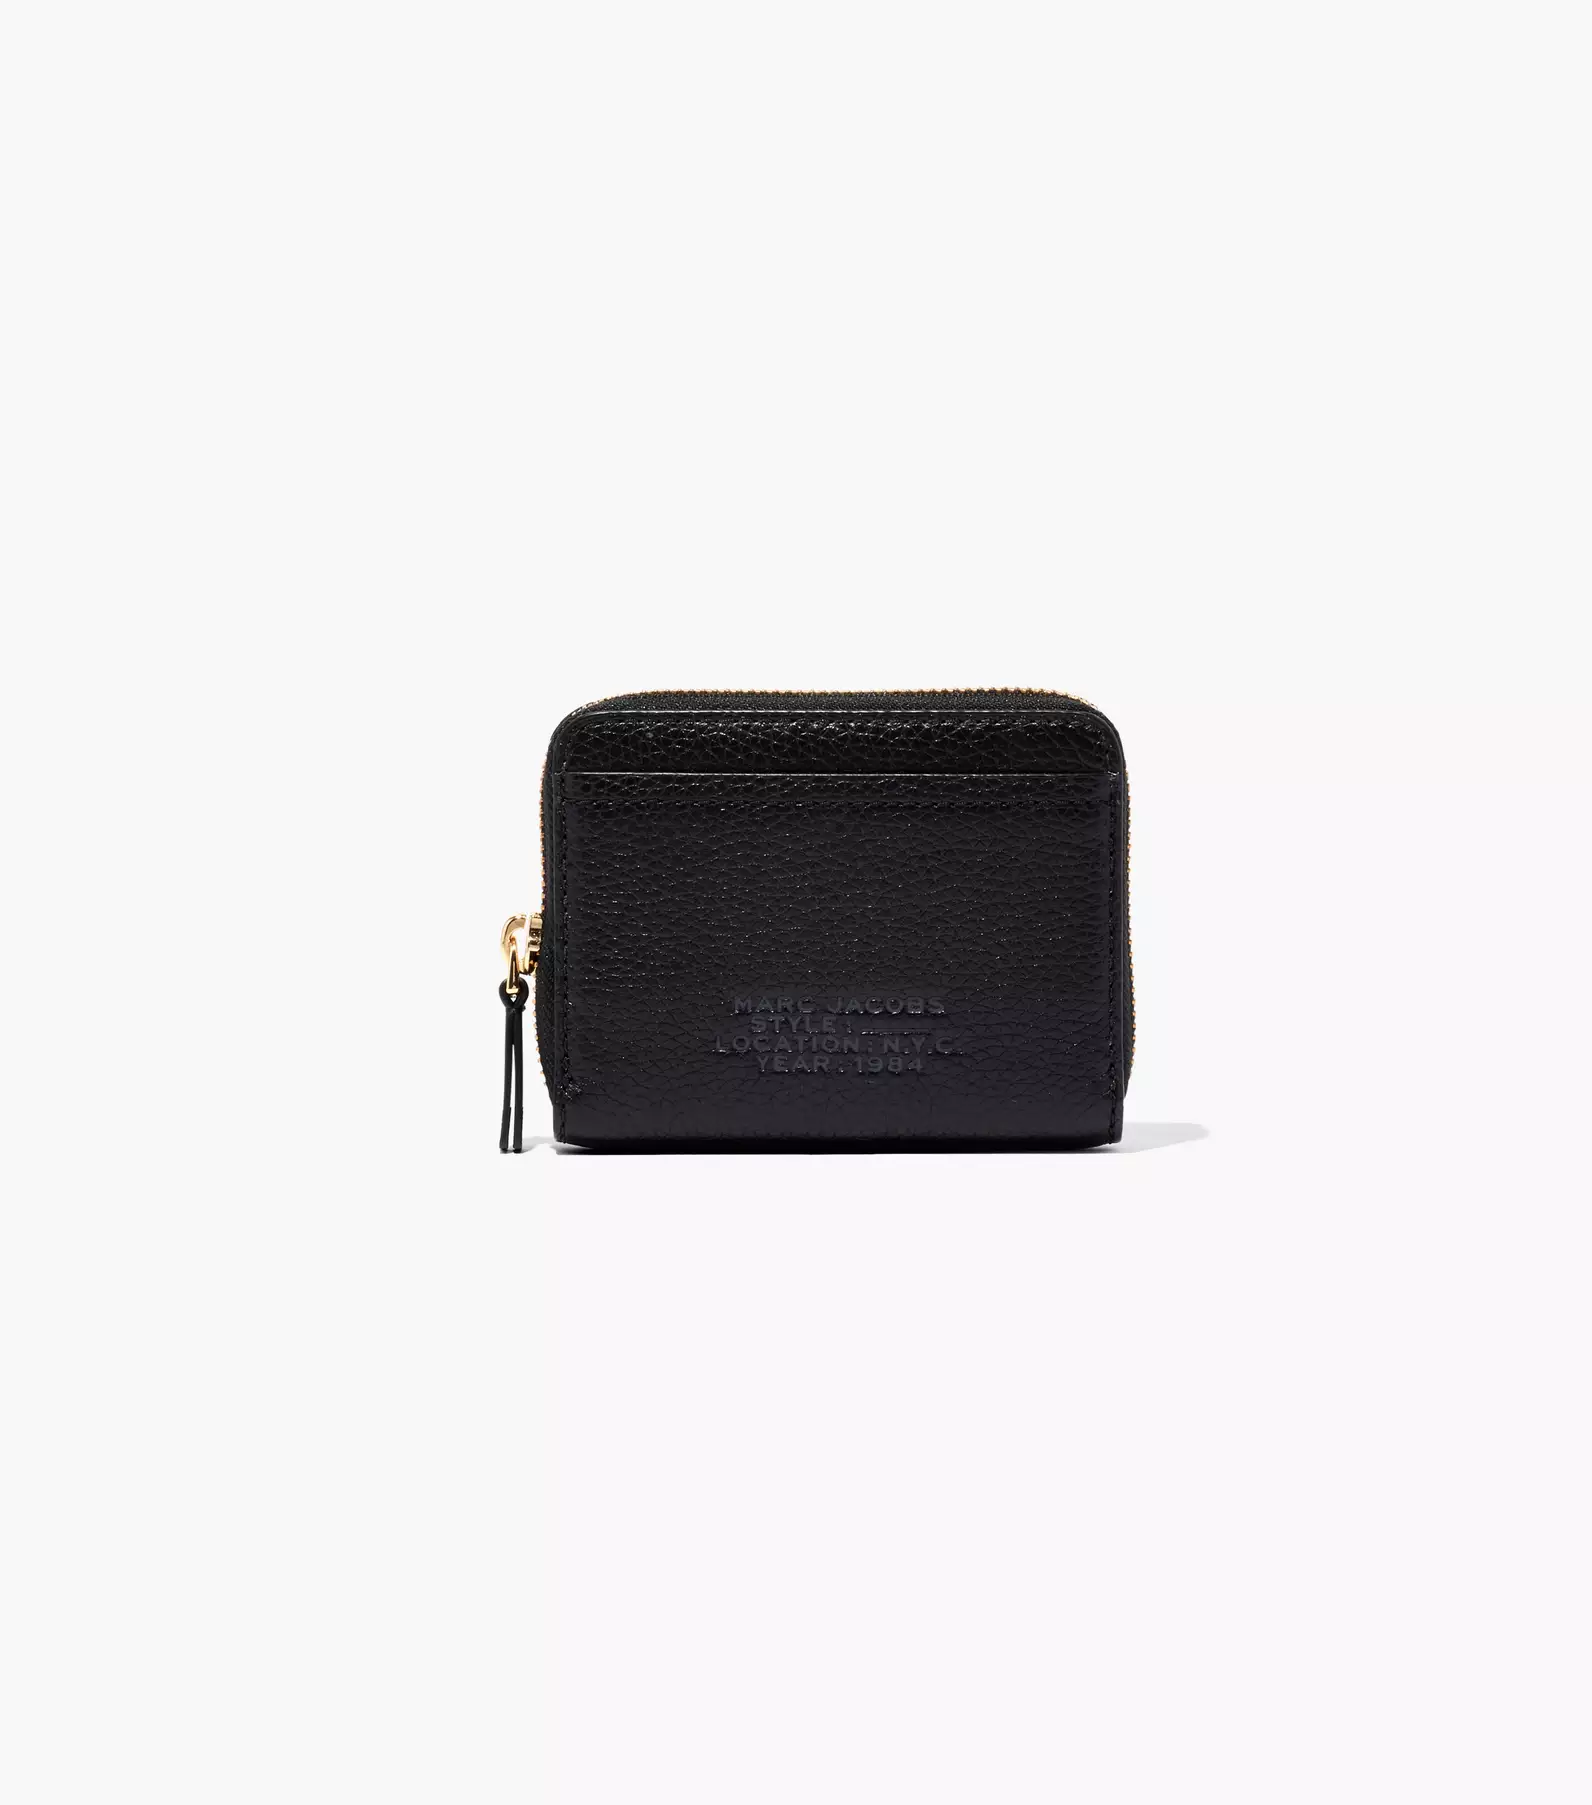 Marc Jacobs Round Grained Leather Coin Purse in Black